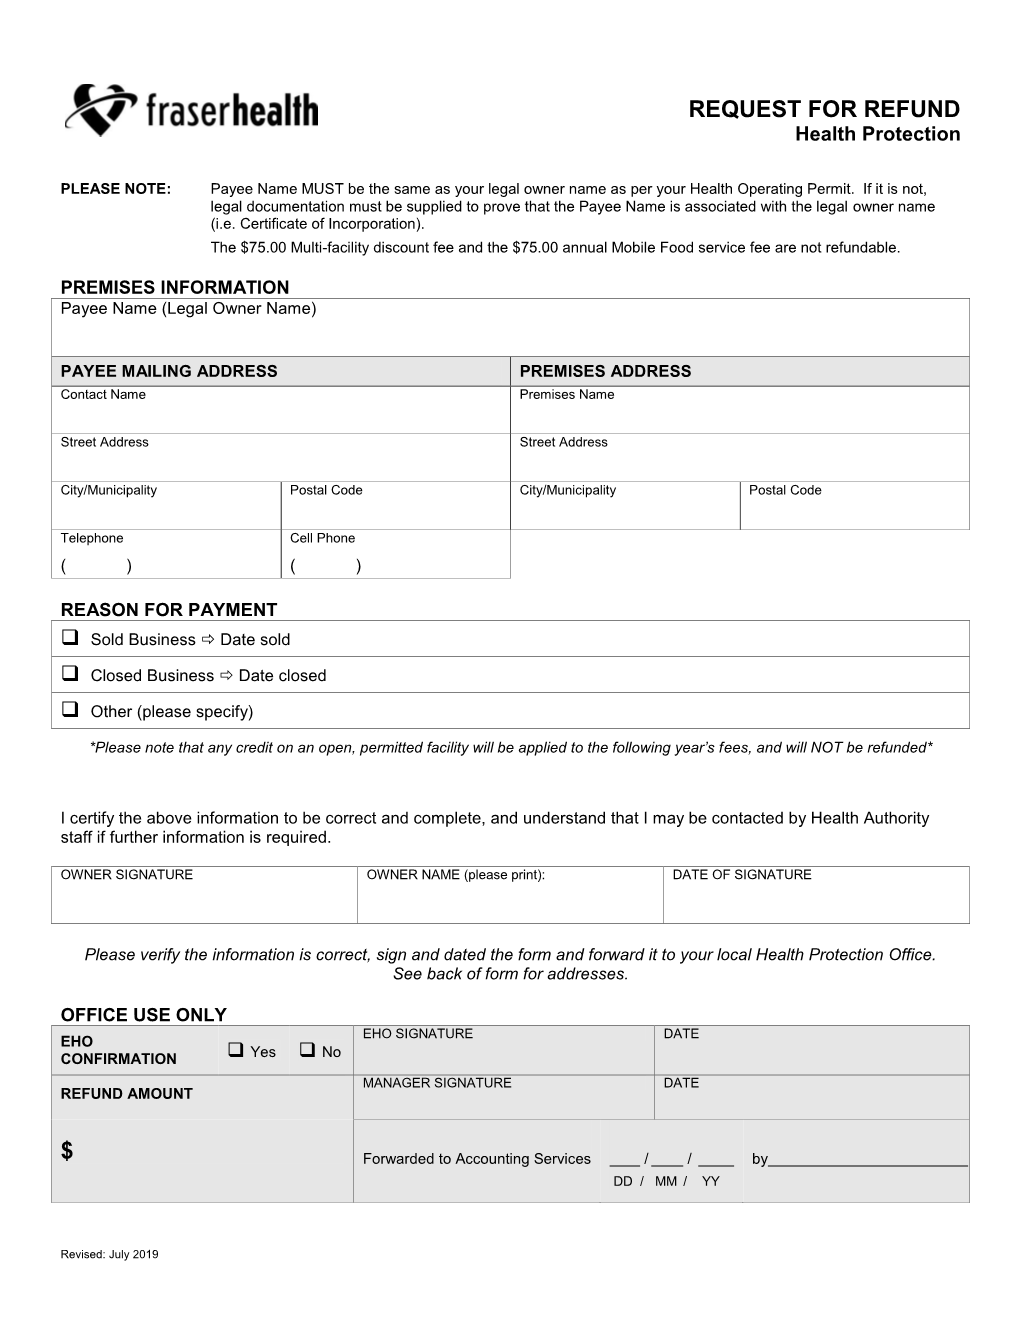 Download the Request for Refund Form